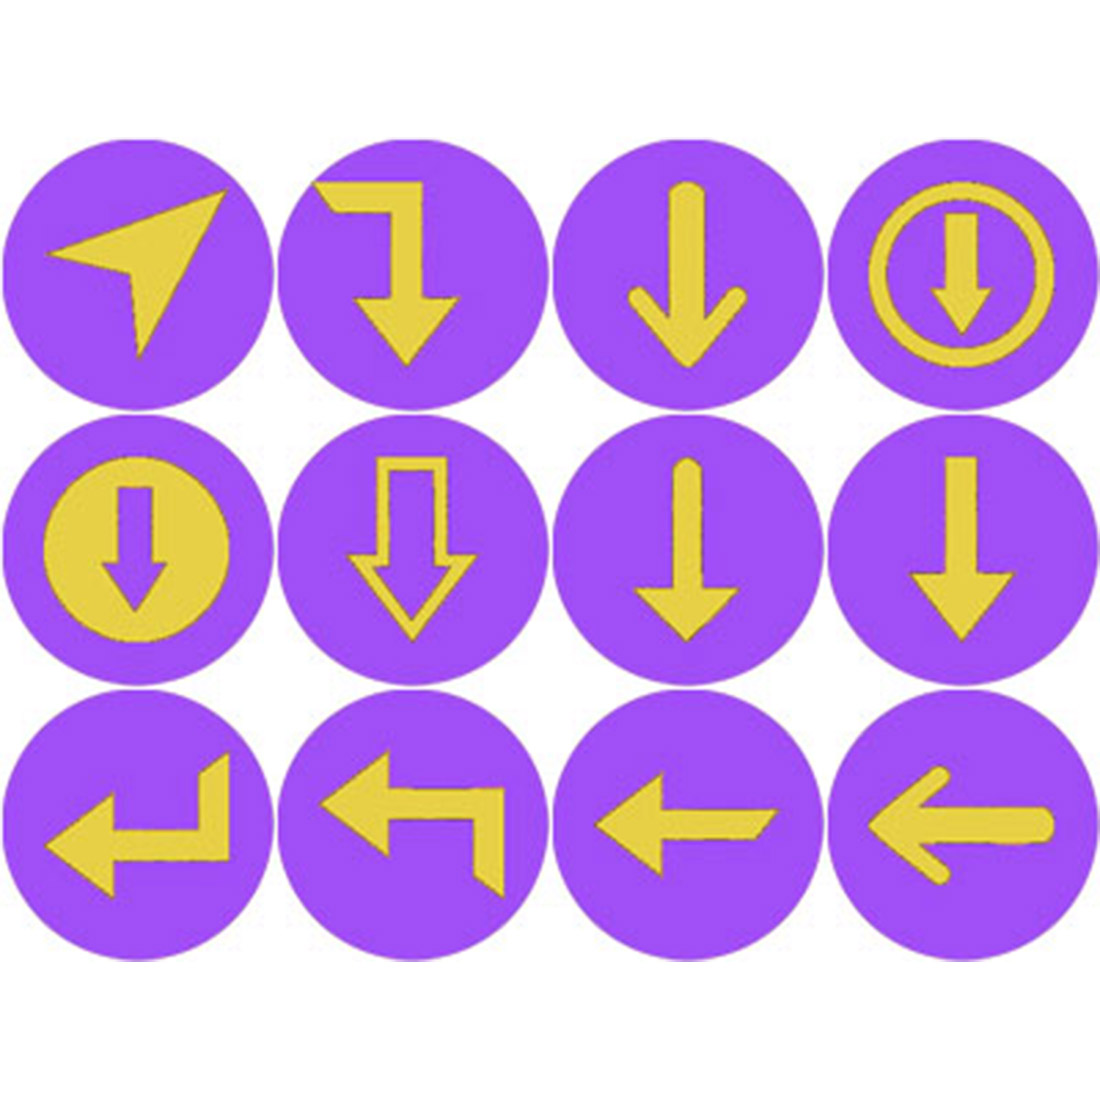 ELECTRIC PURPLE AND YELLOW ARROW ICONS cover image.